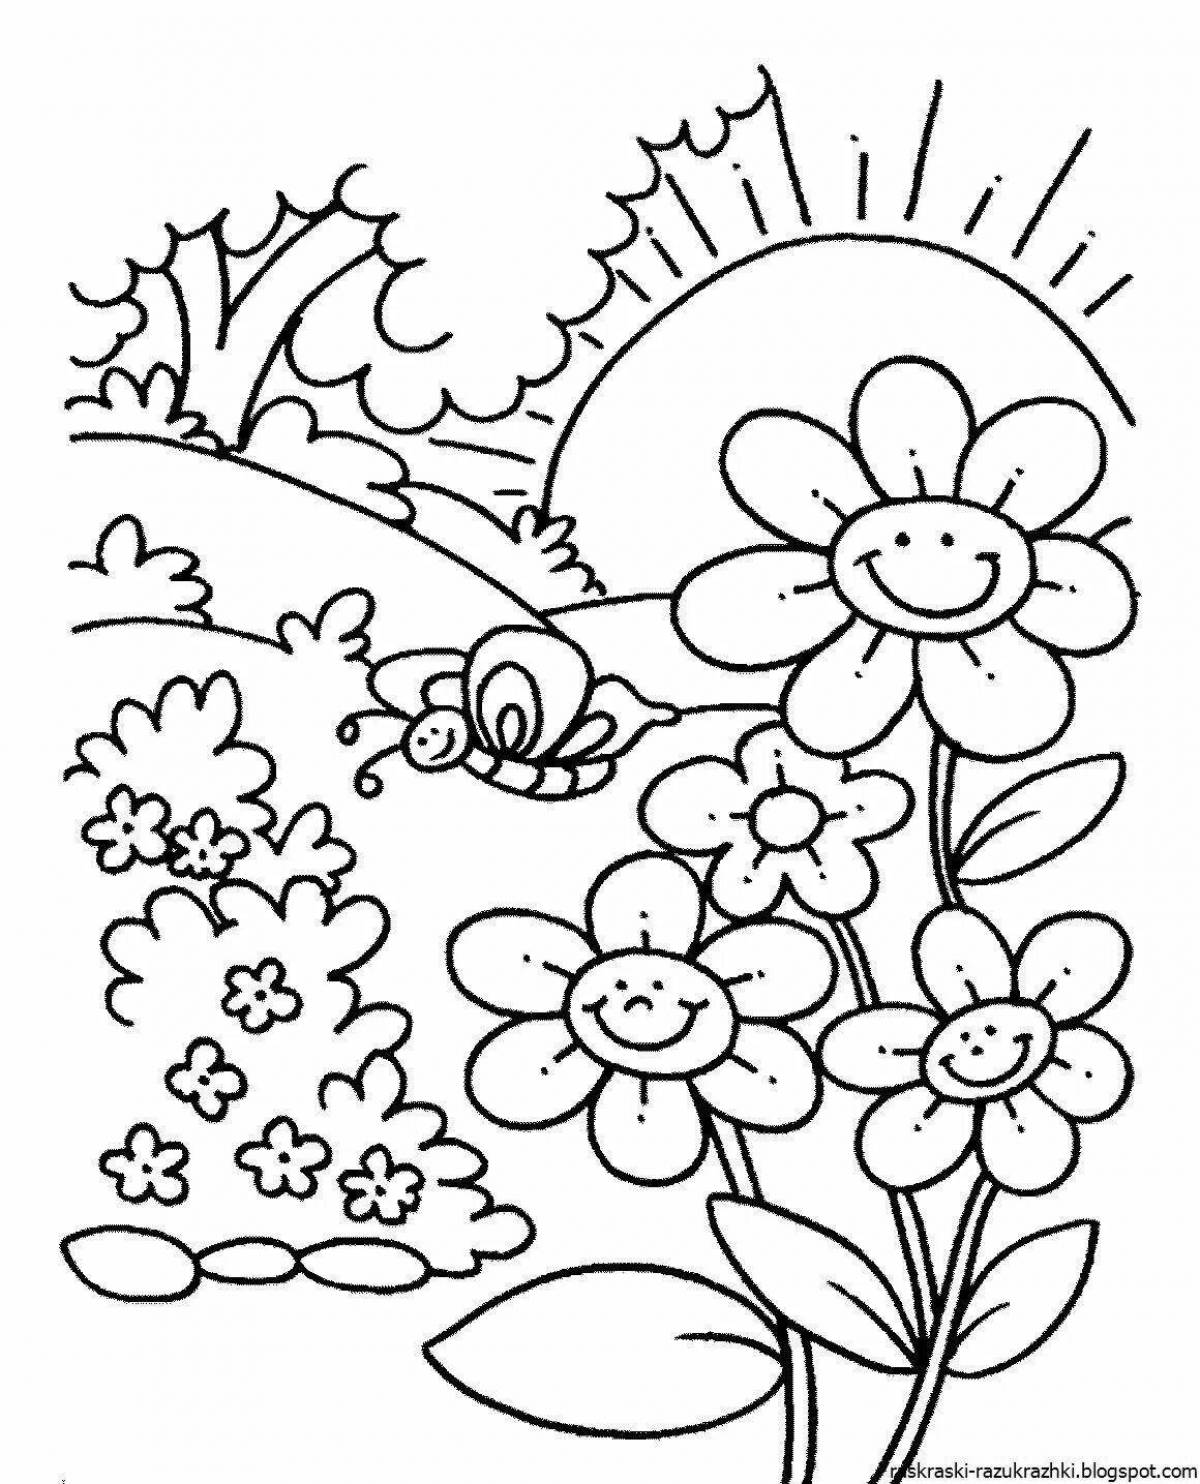 Glittering Meadow coloring book for kids